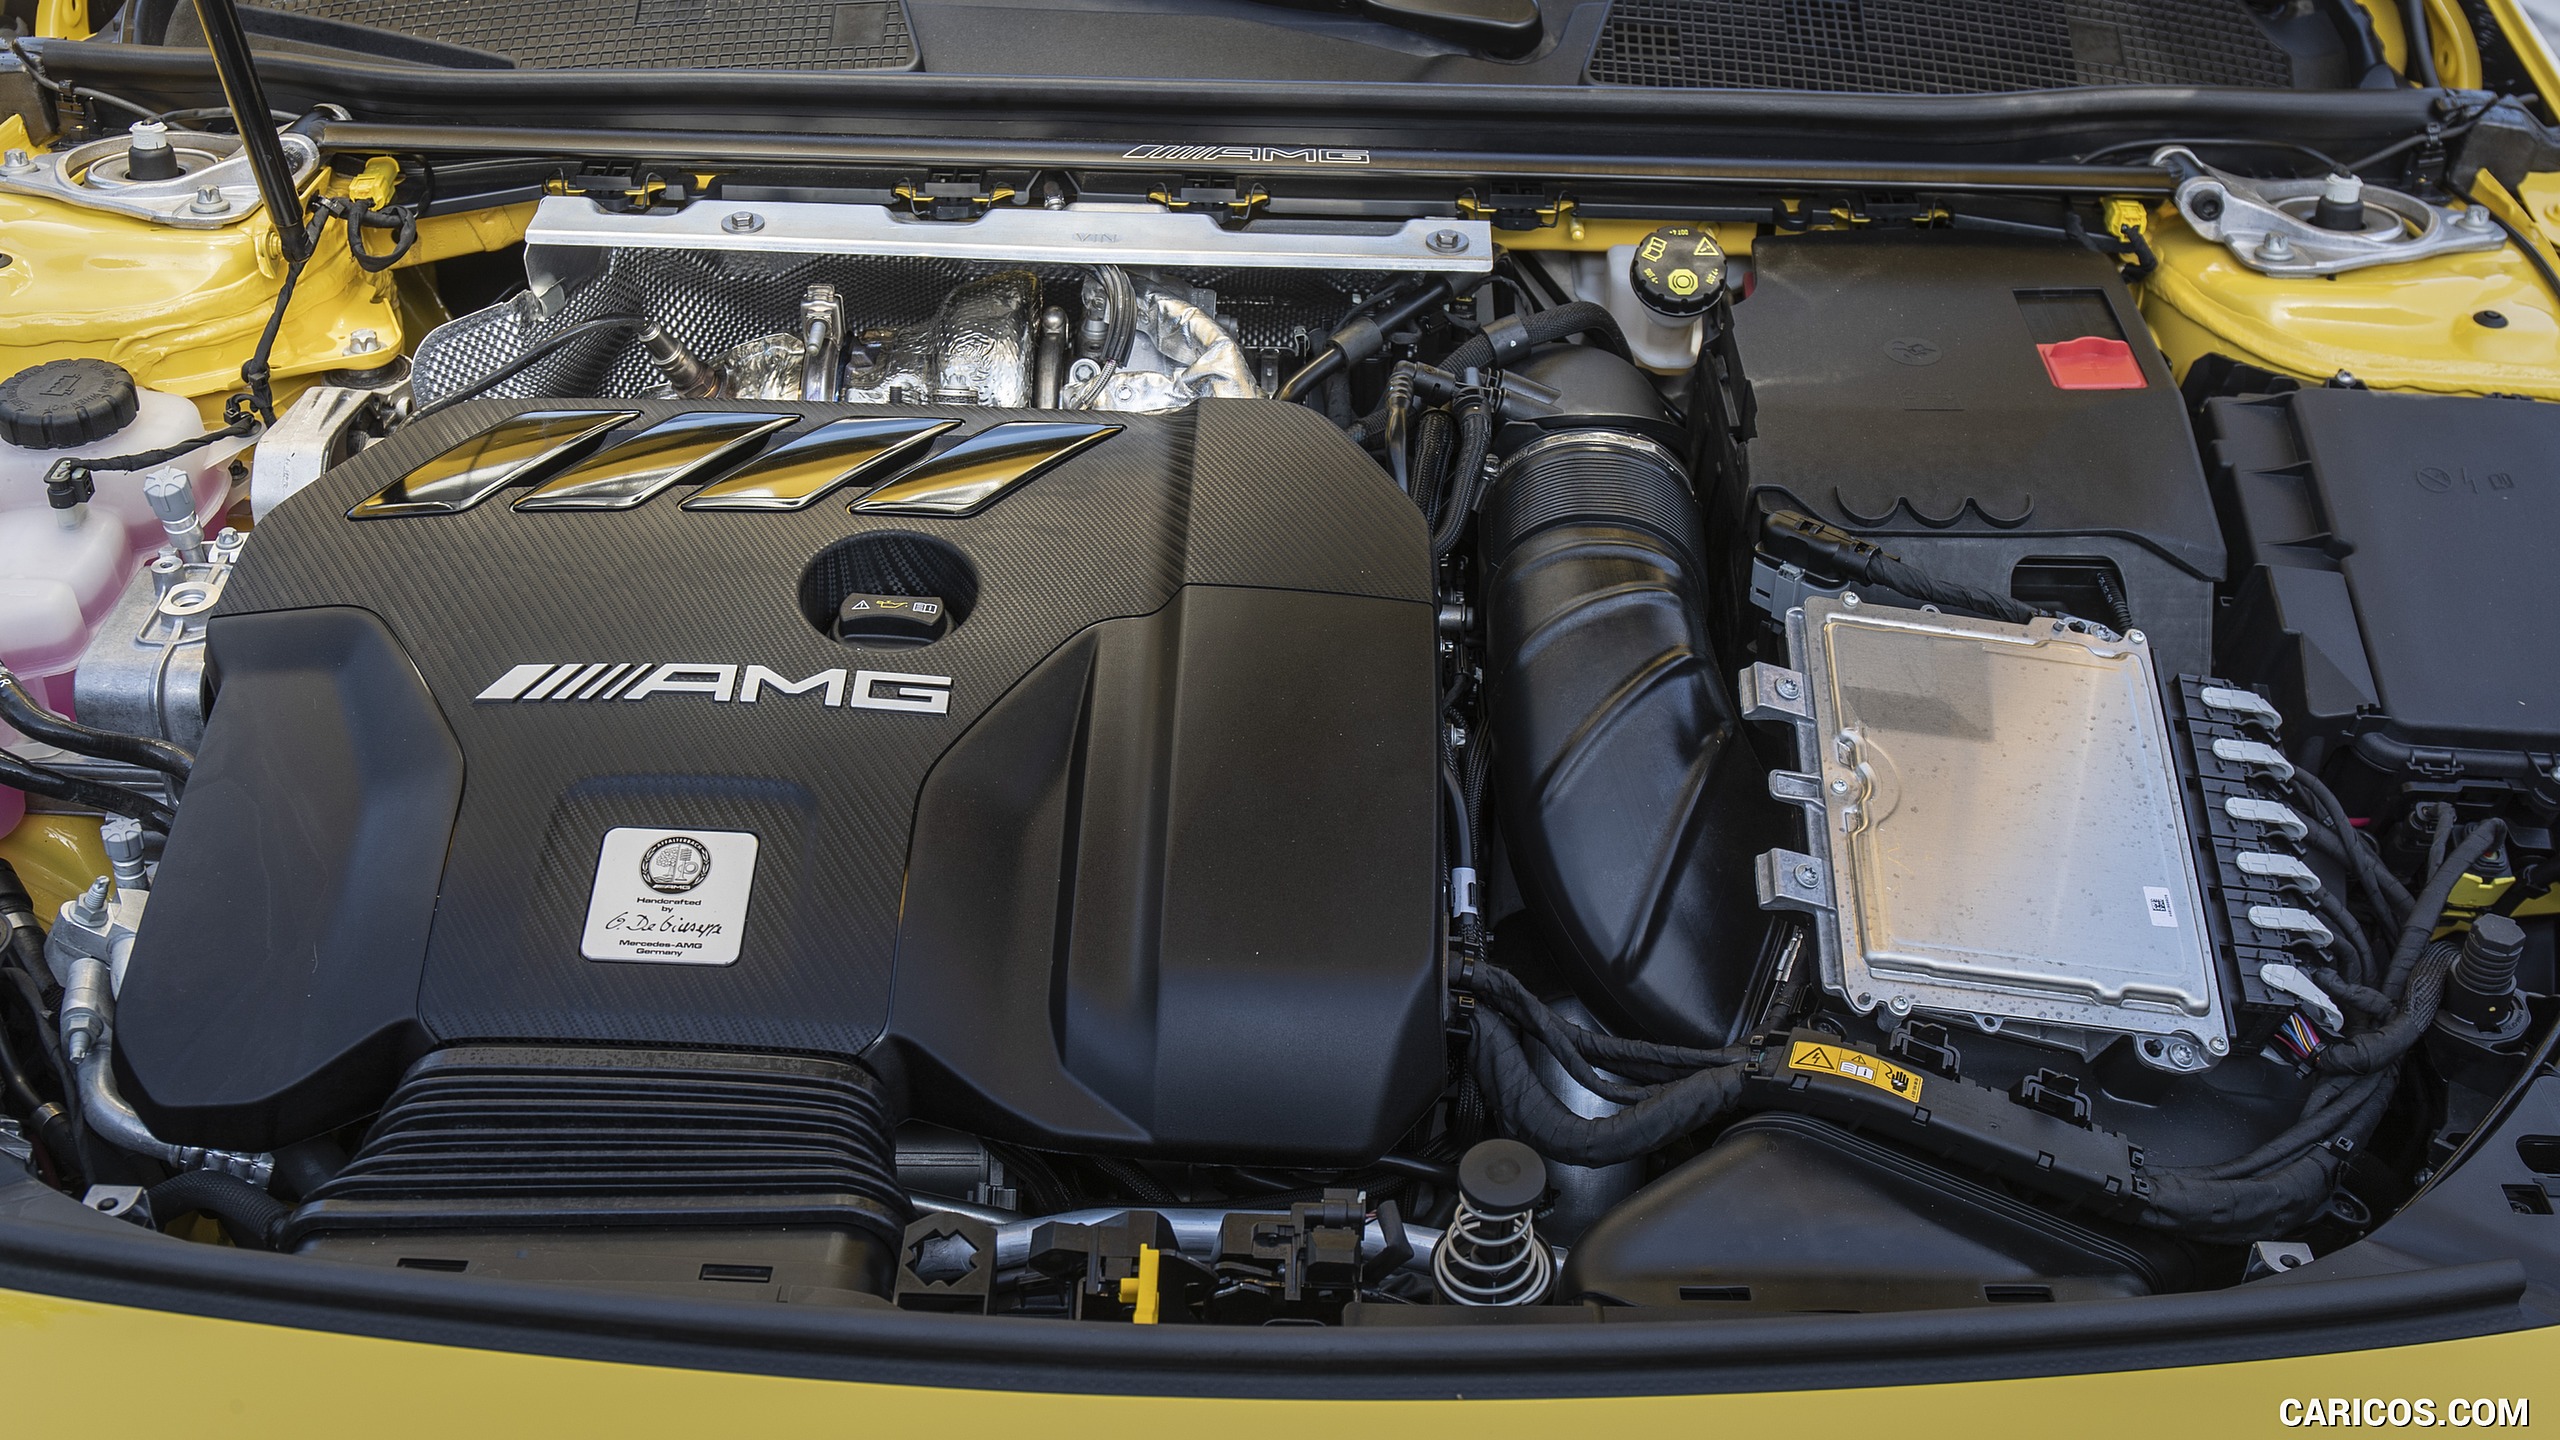 2020 Mercedes-AMG A 45 S 4MATIC+ - Engine, #110 of 188